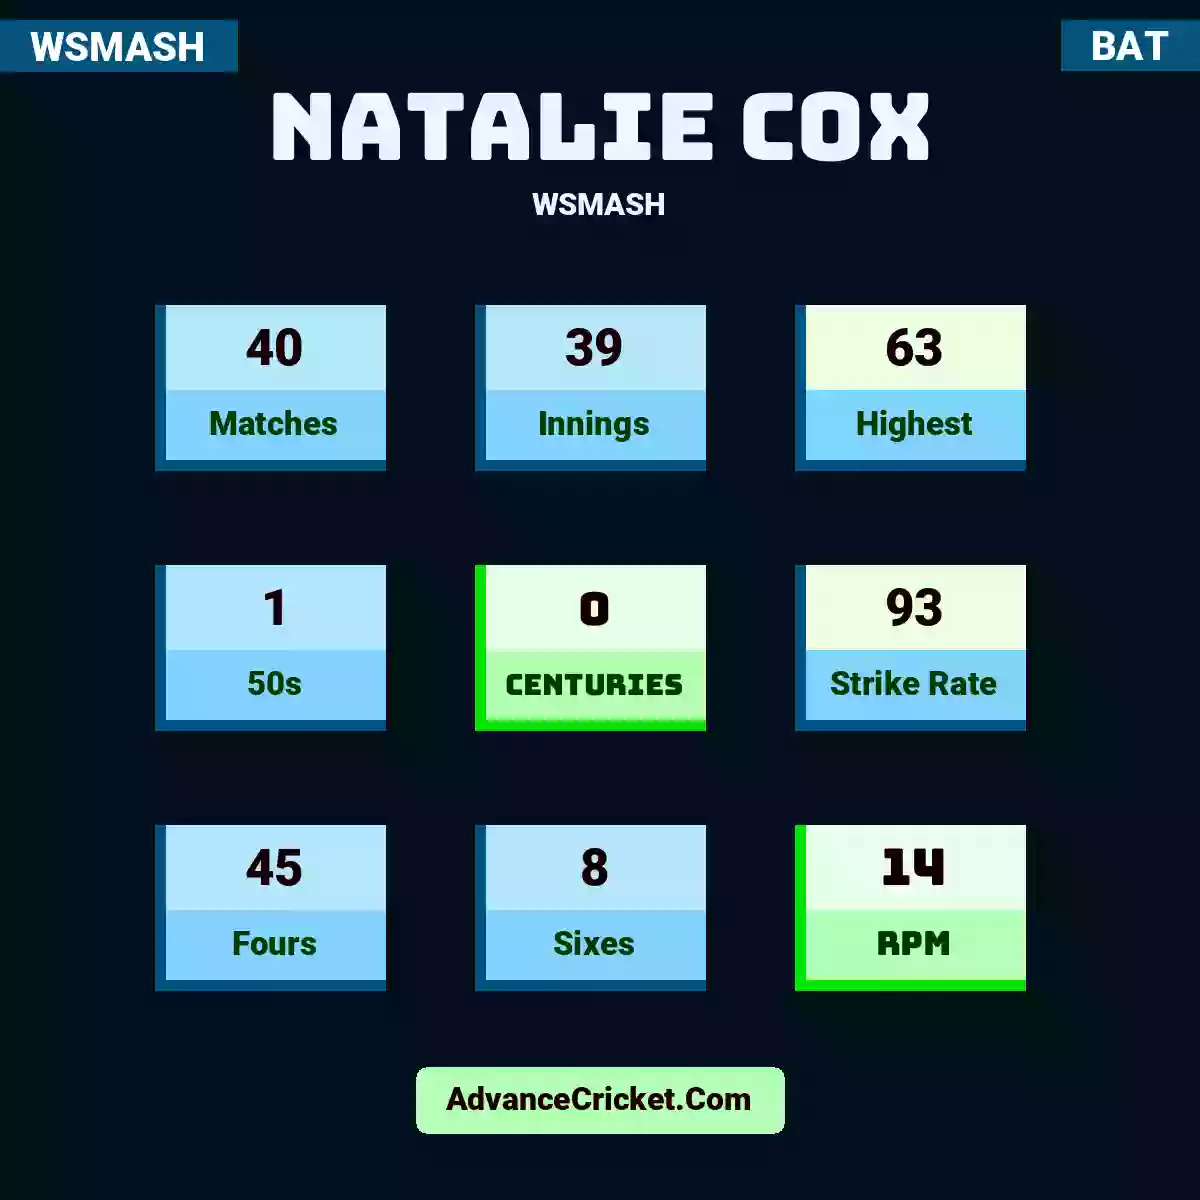 Natalie Cox WSMASH , Natalie Cox played 40 matches, scored 63 runs as highest, 1 half-centuries, and 0 centuries, with a strike rate of 93. N.Cox hit 45 fours and 8 sixes, with an RPM of 14.